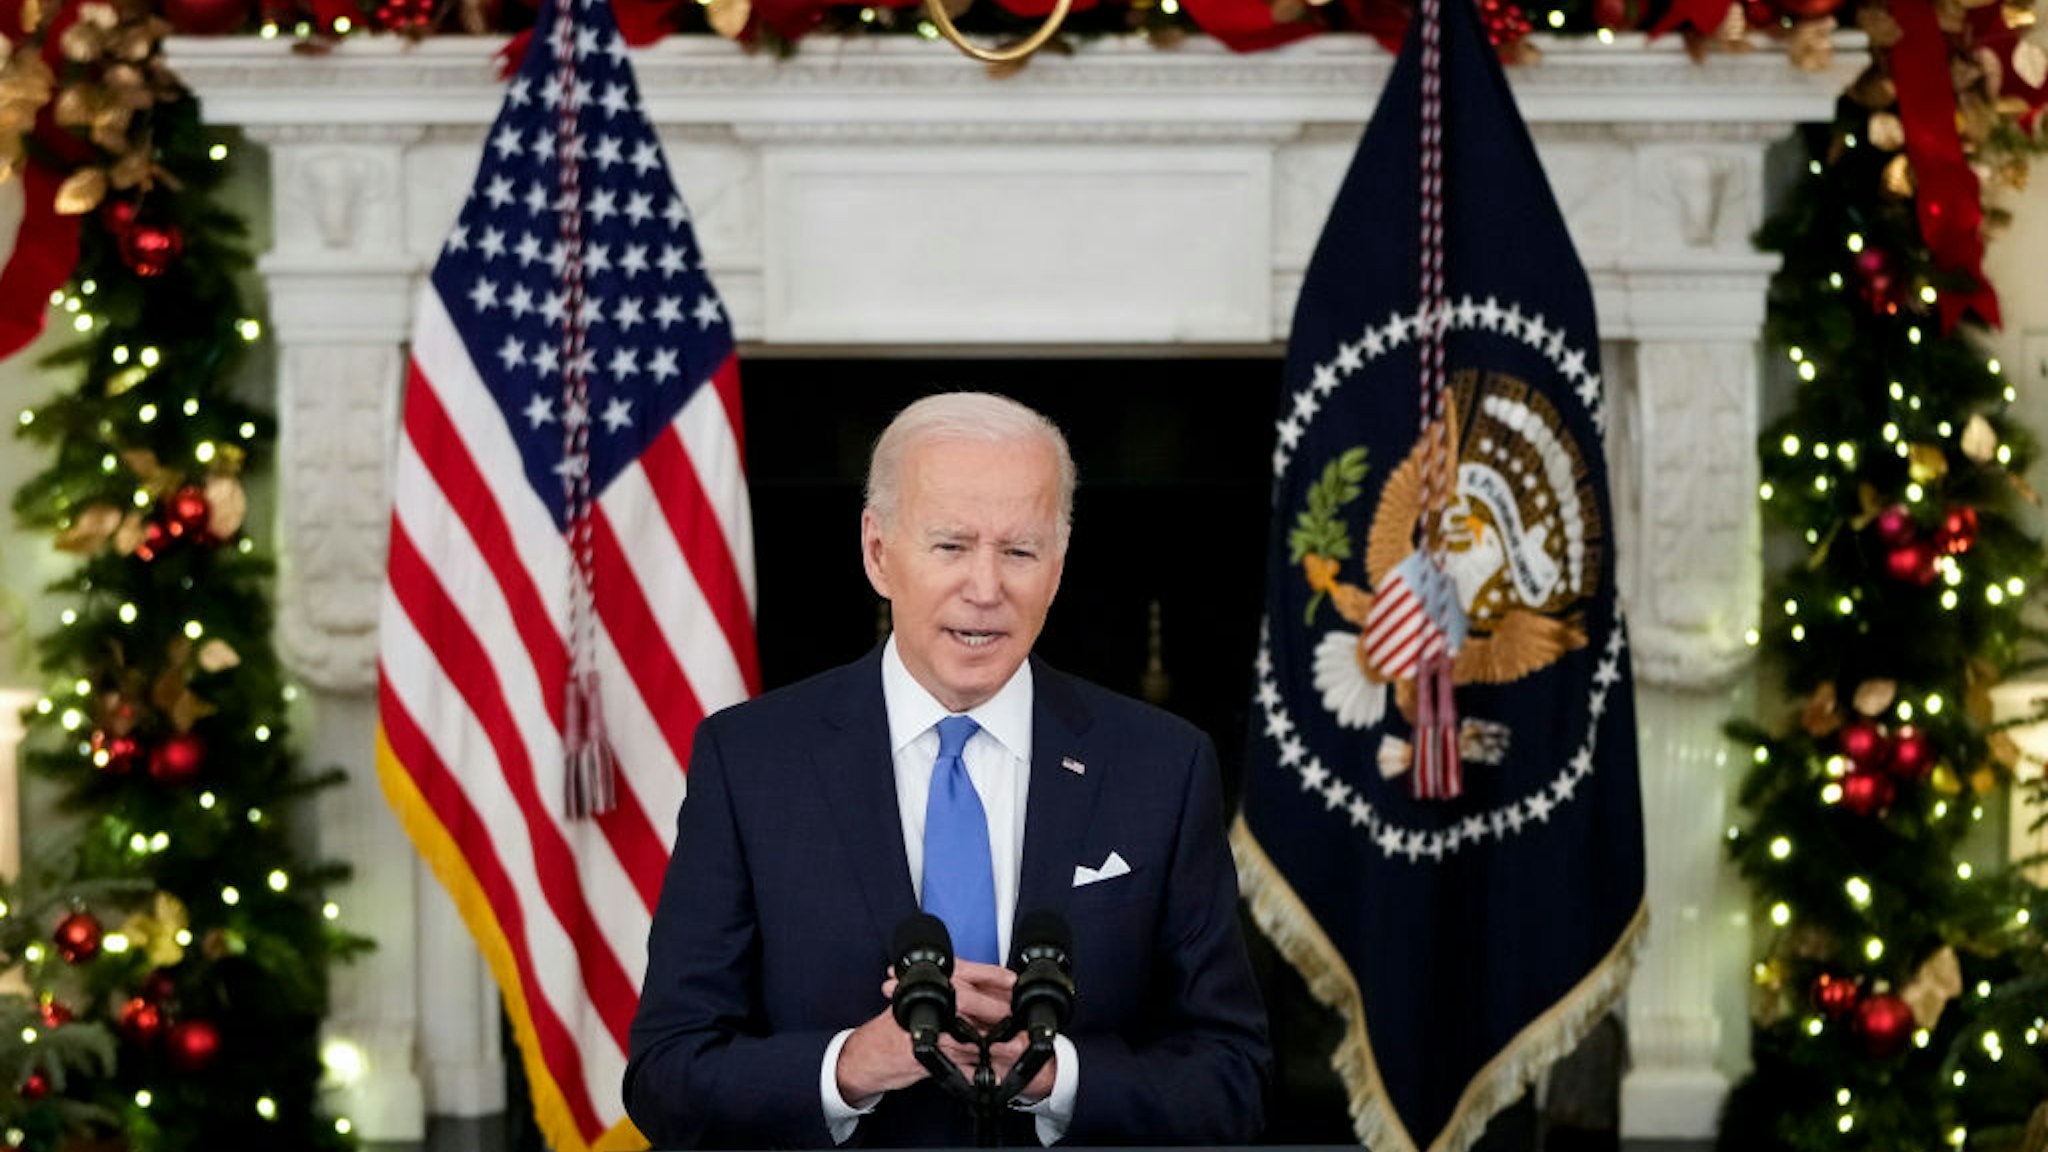 WASHINGTON, DC - DECEMBER 21: U.S. President Joe Biden speaks about the omicron variant of the coronavirus in the State Dining Room of the White House, December 21, 2021 in Washington, DC. As the omicron variant fuels a new wave of COVID-19 infections, Biden announced plans that will expand testing sites across the country, distribute millions of free at-home tests and boost federal resources to hospitals in need.